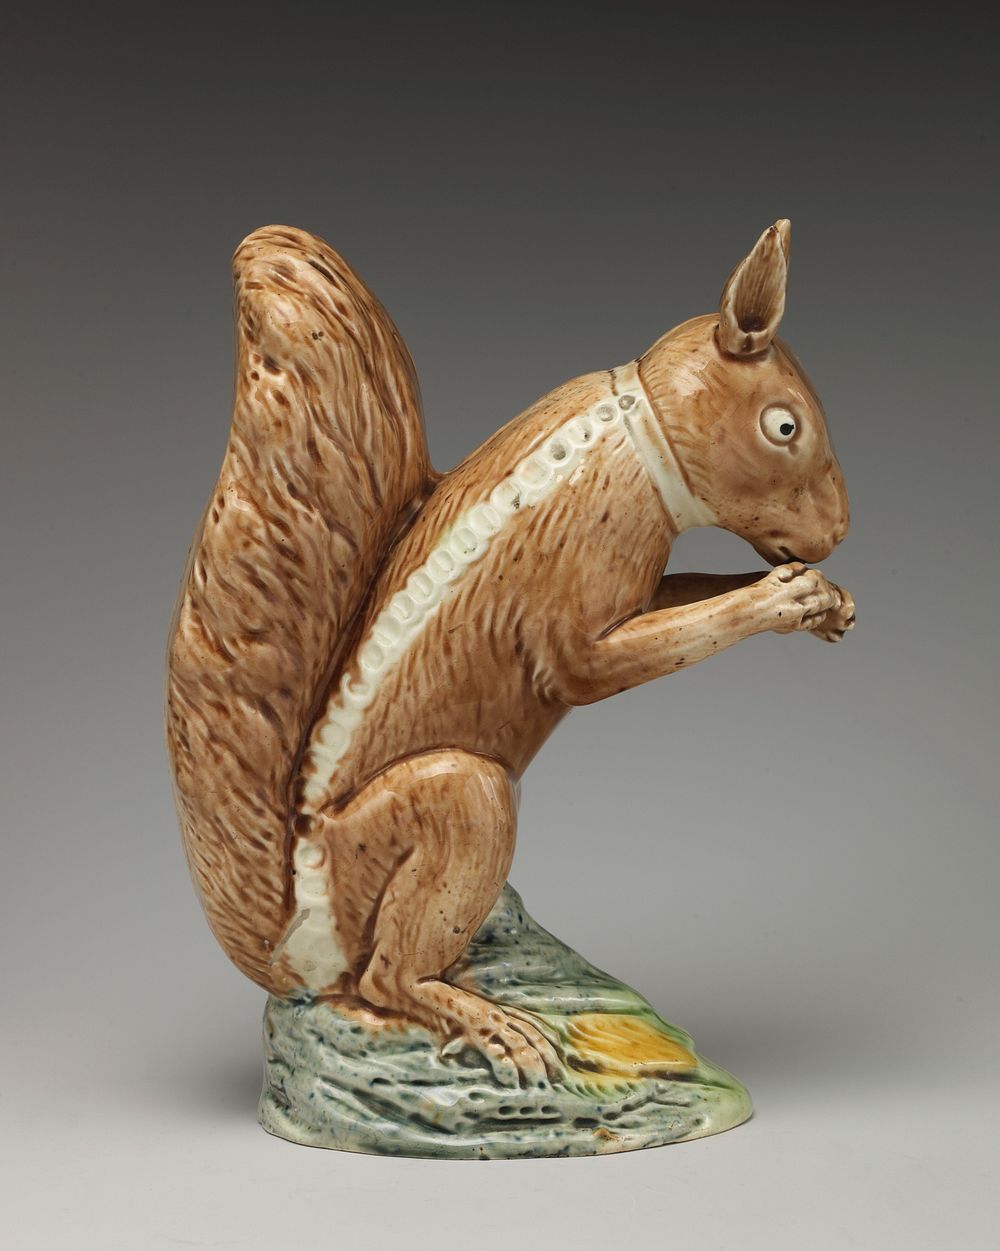 Brown squirrel with collar and chain